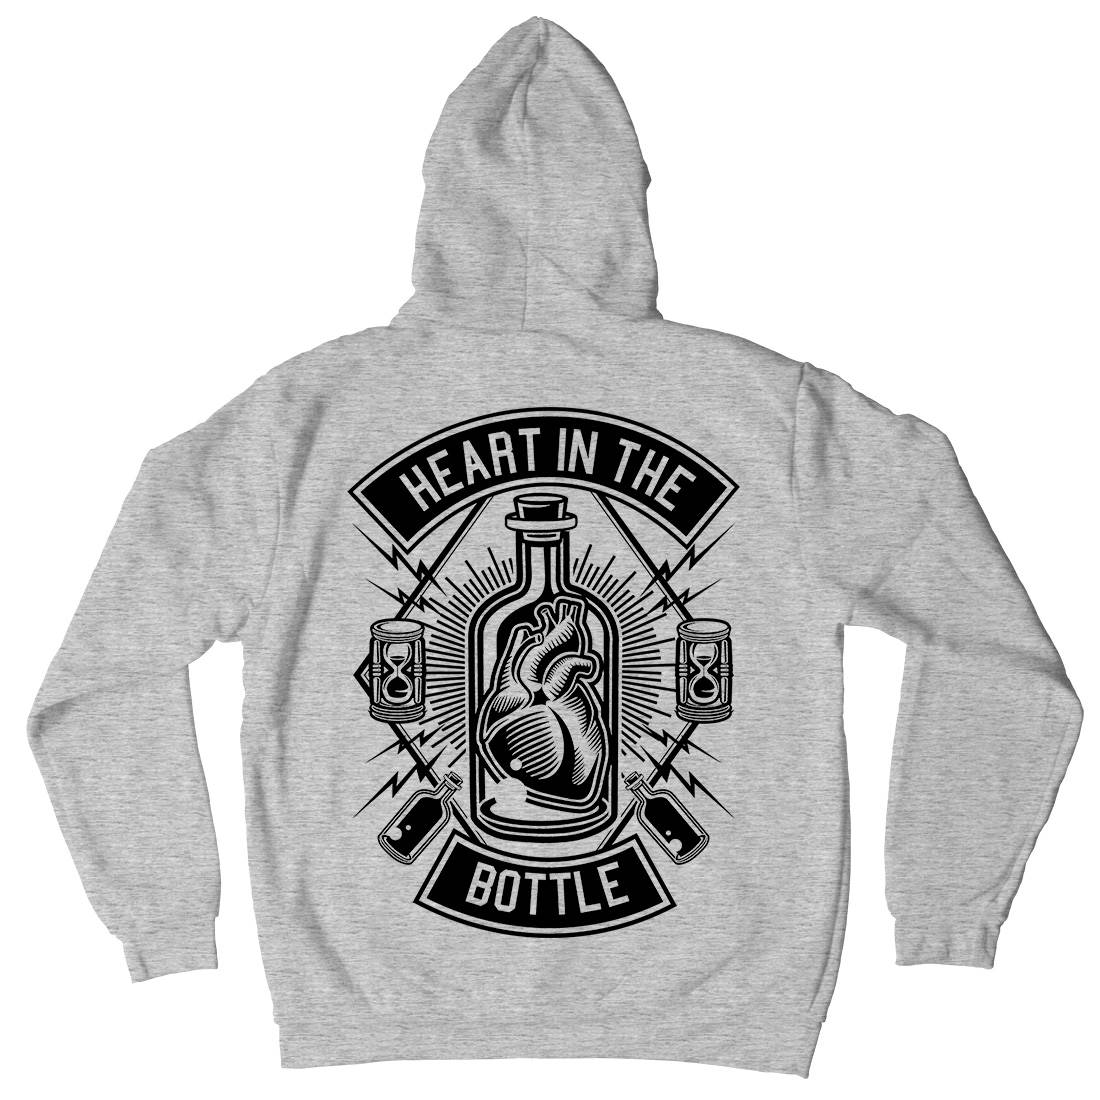 Heart In The Bottle Mens Hoodie With Pocket Navy B552